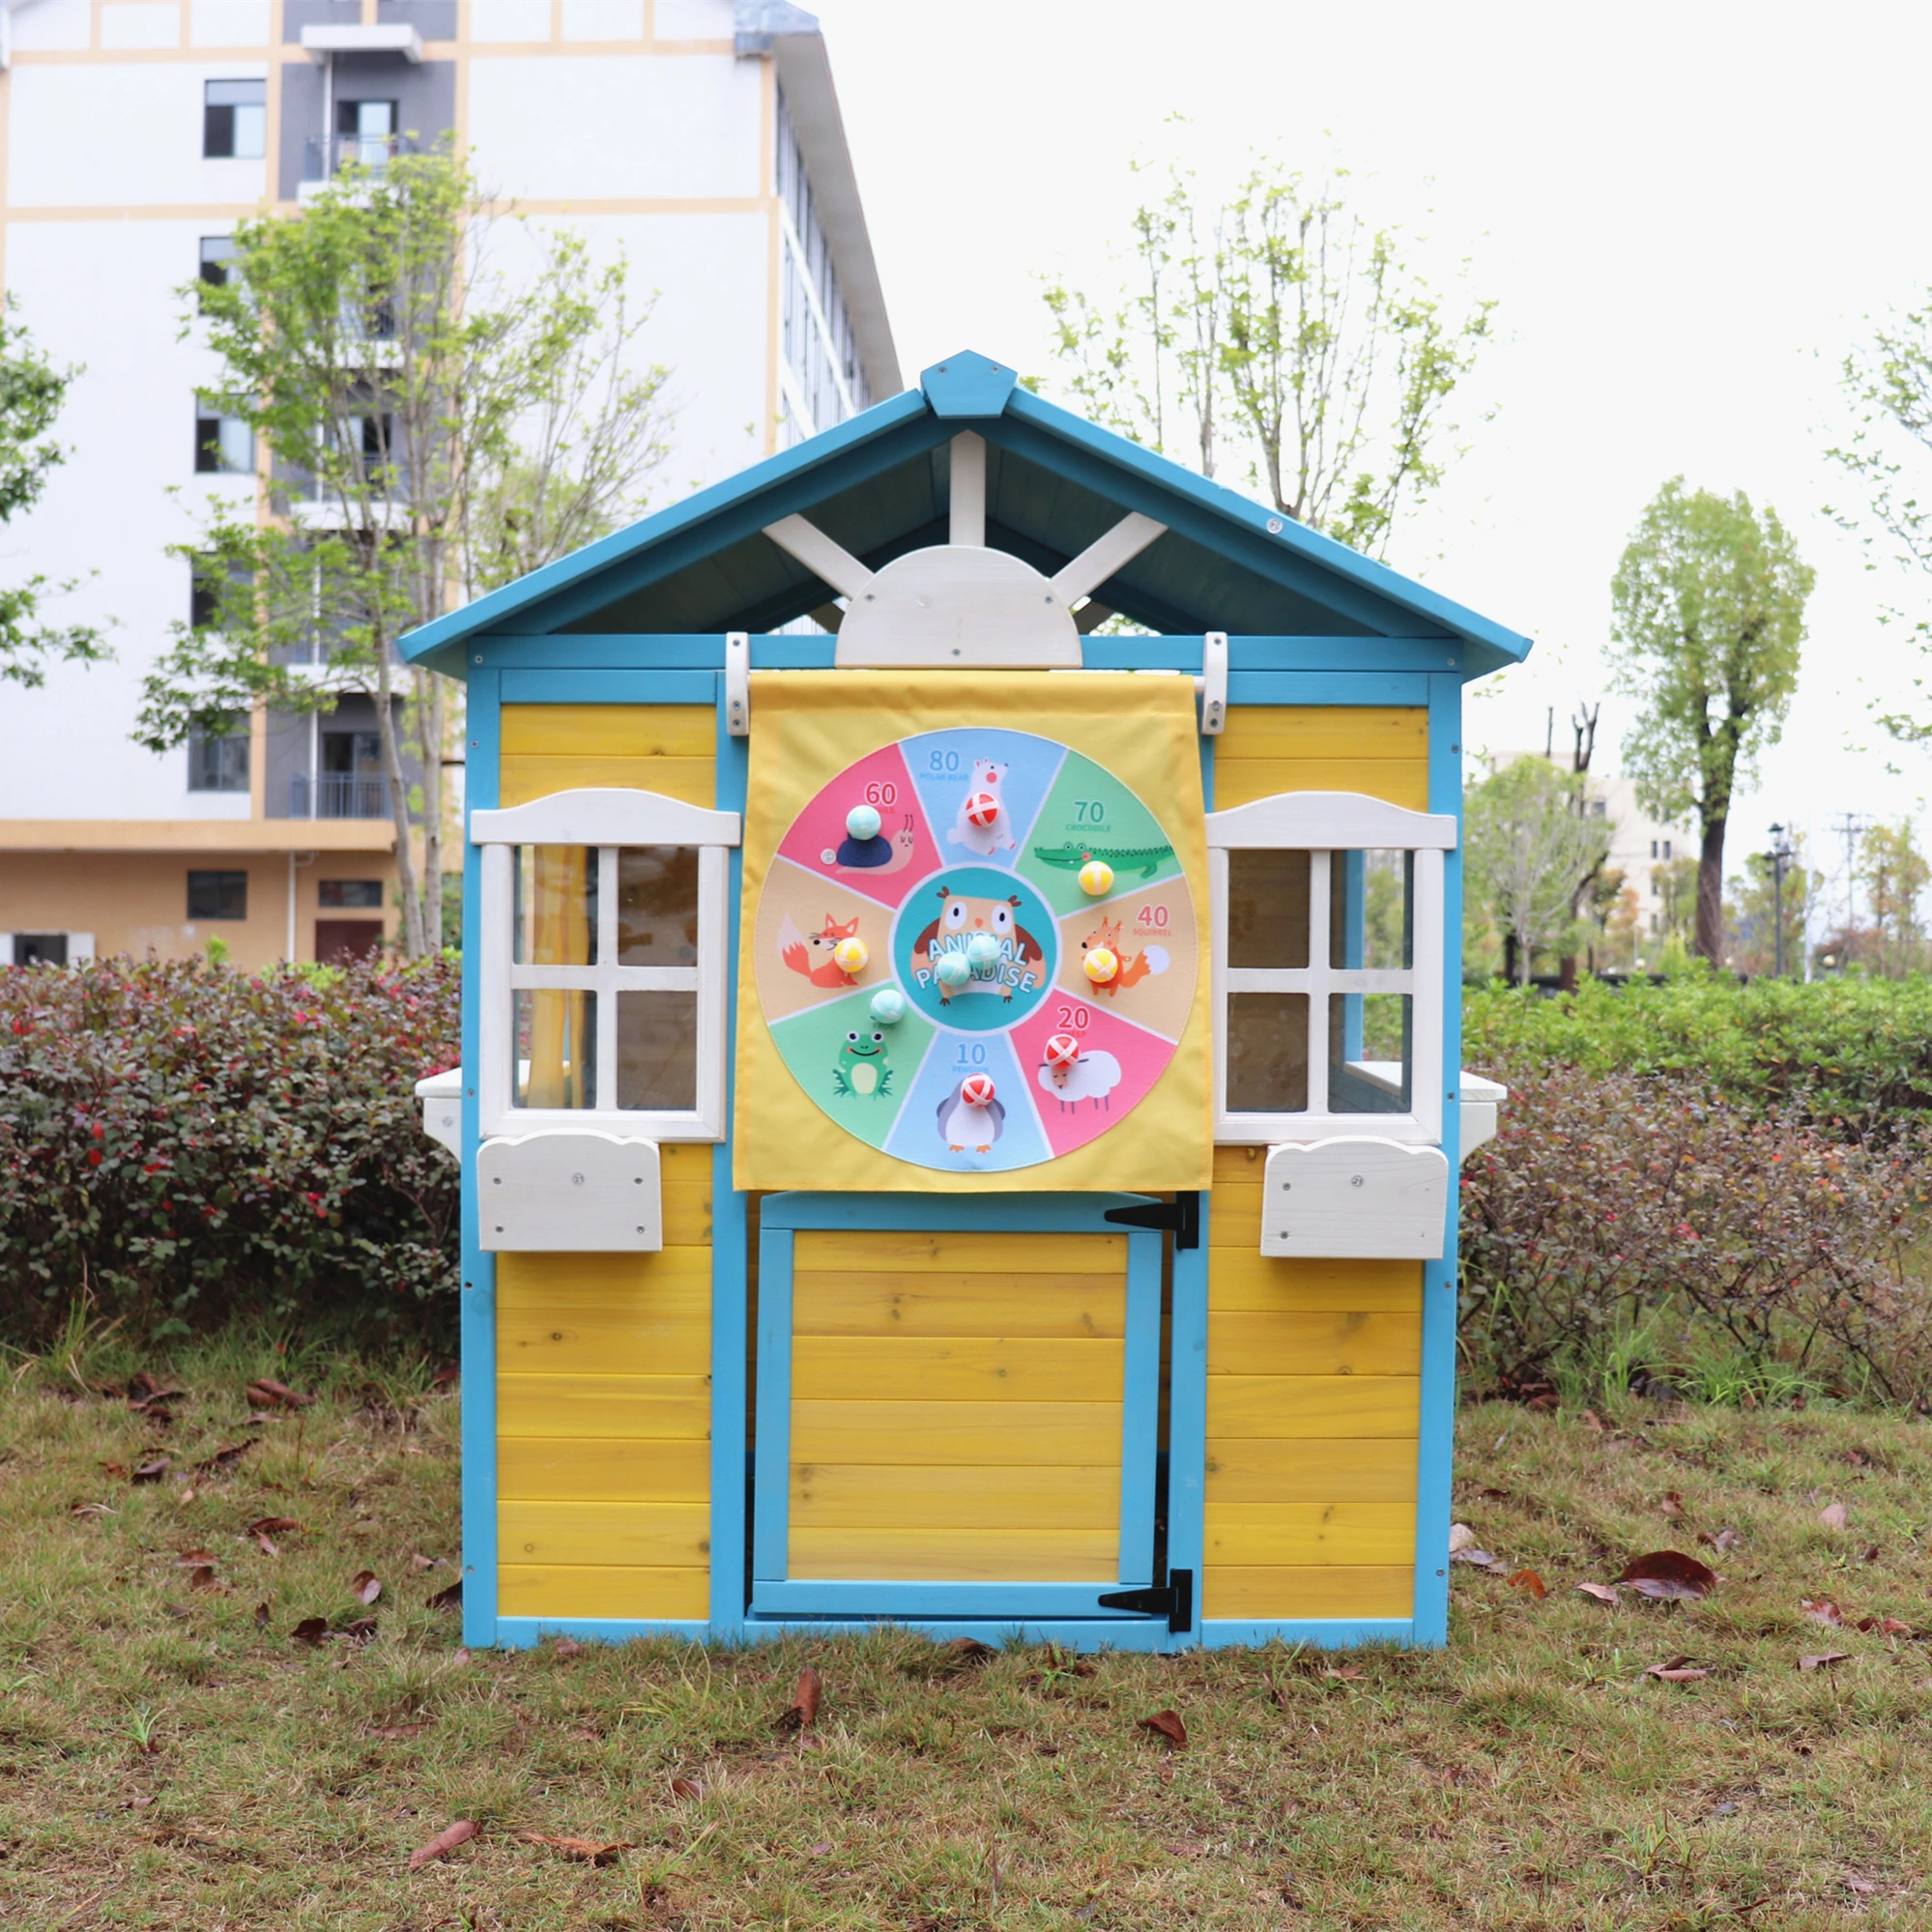 

Outdoor Playhouse for Kids Wooden Cottage with Working Doors Windows Pretend Play House for Age 3-8 Years